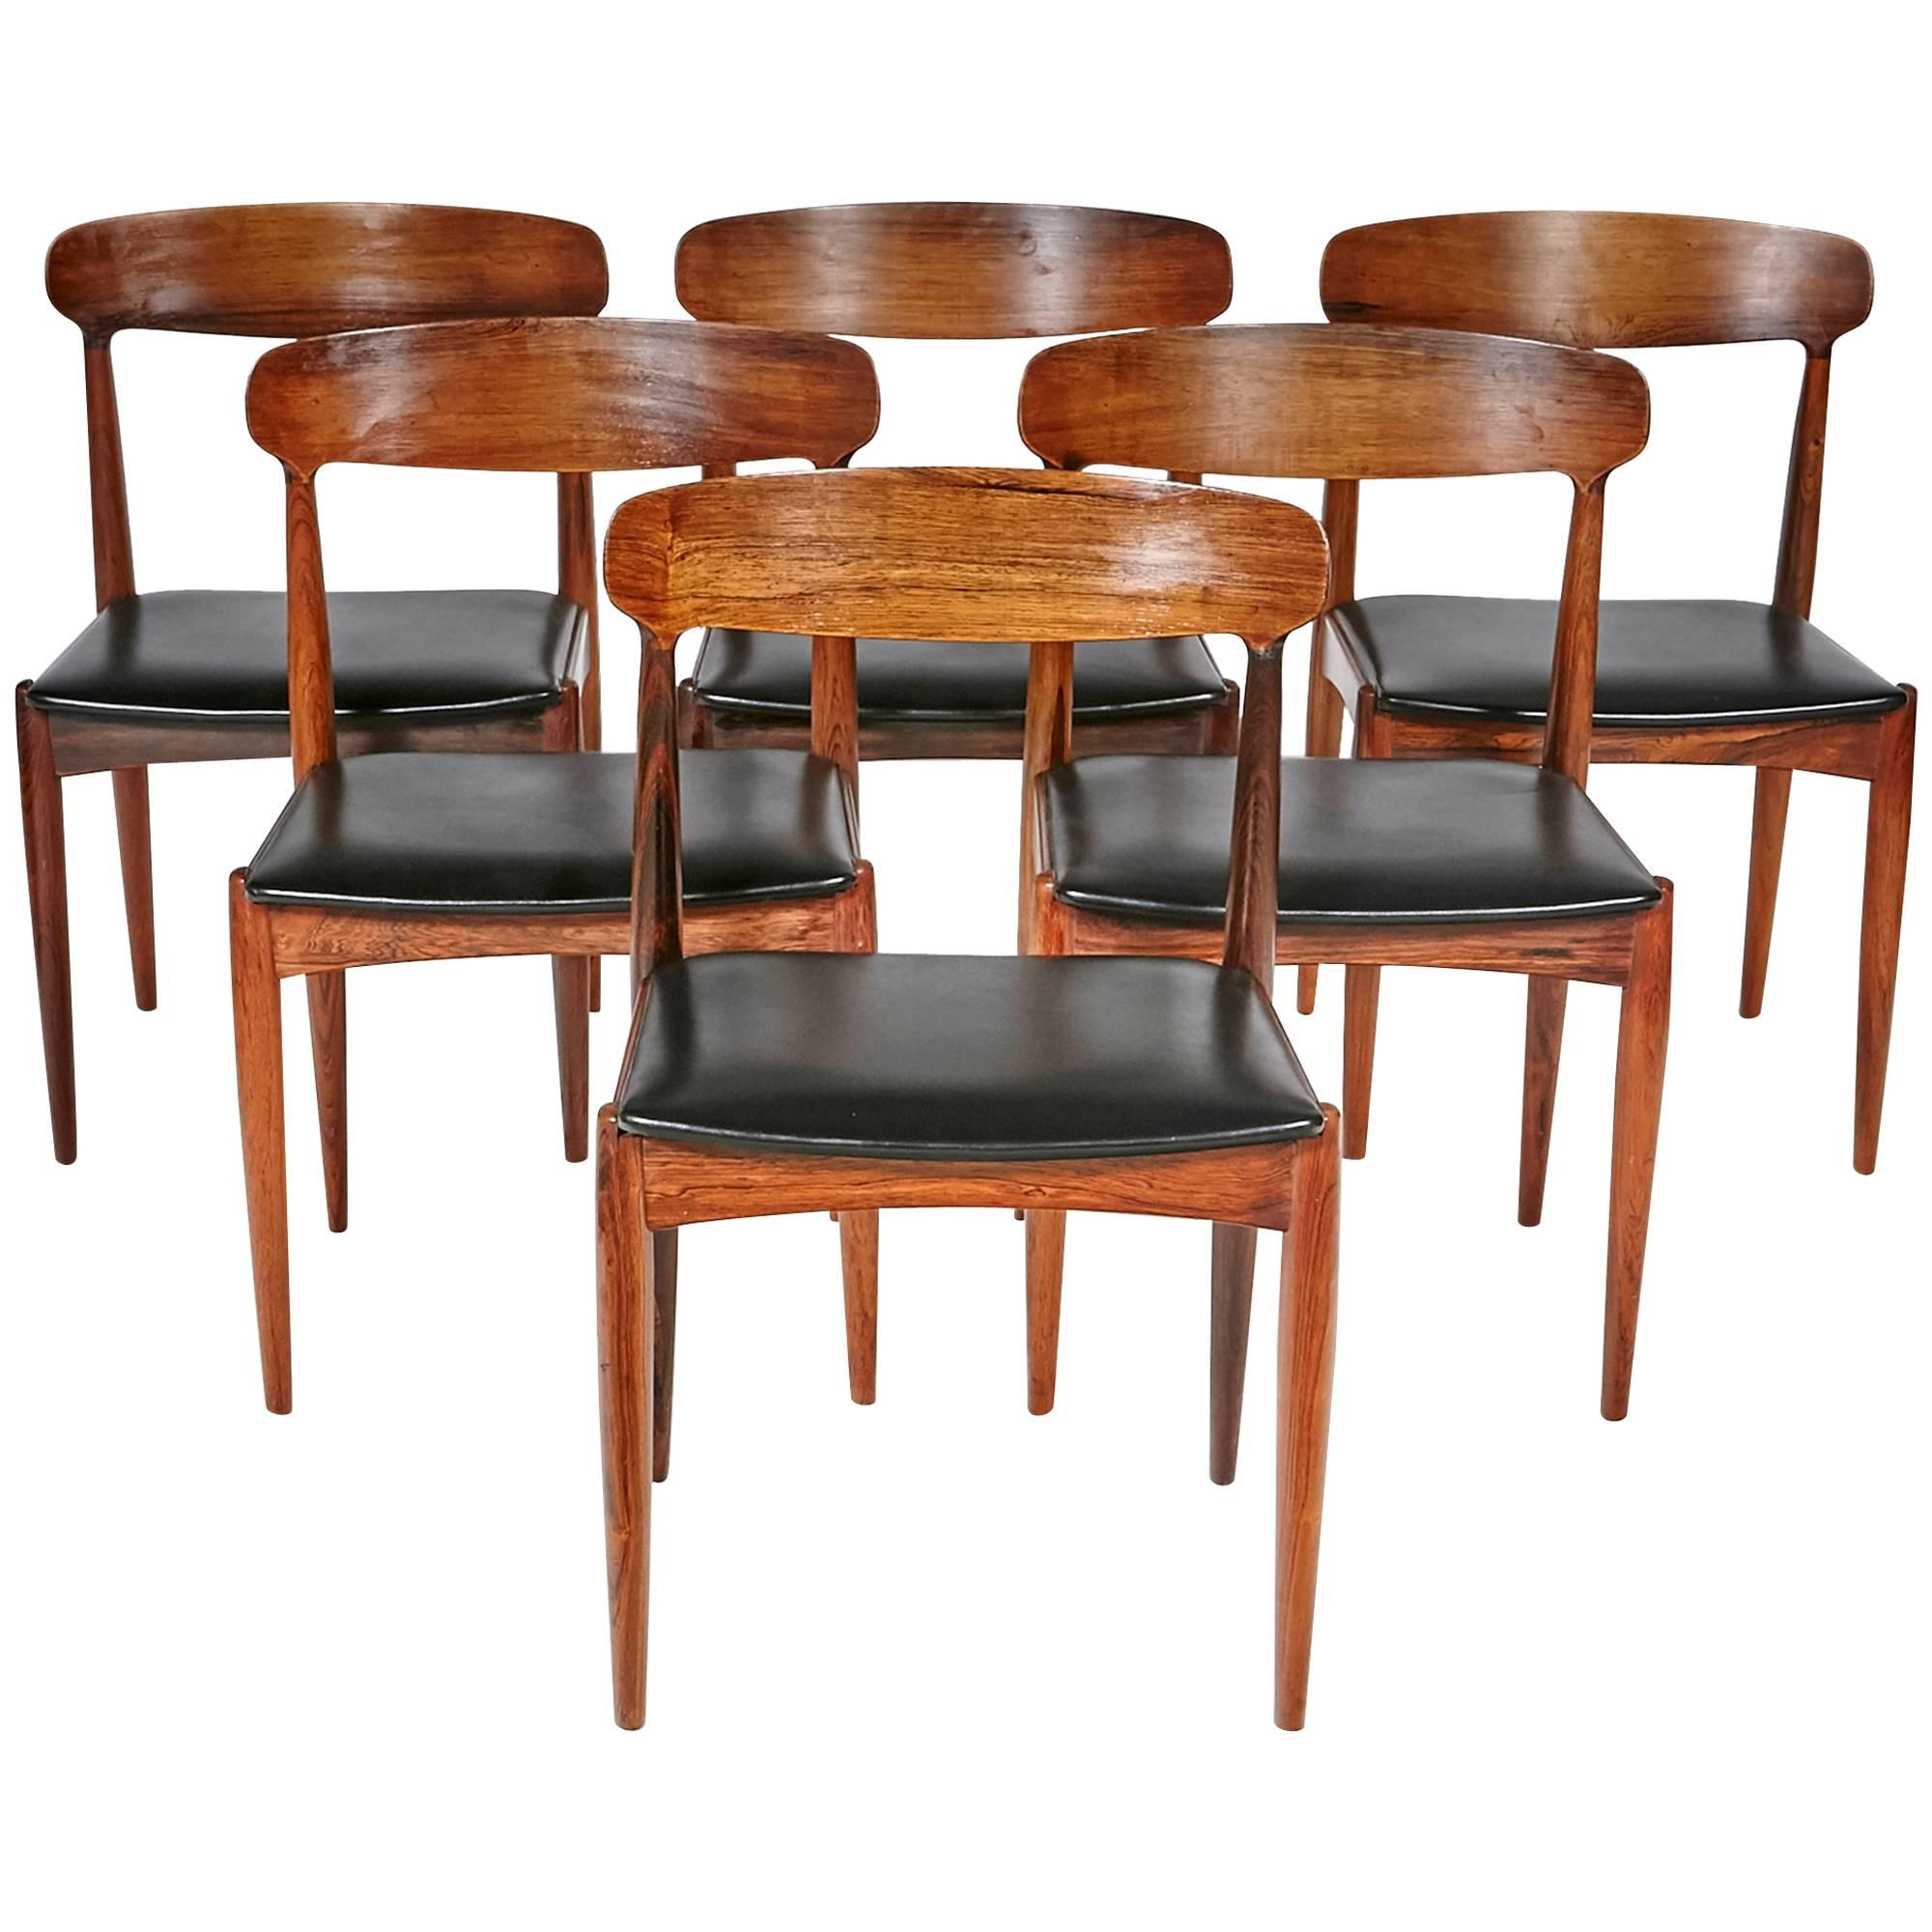 Danish Rosewood Dining Chairs by Johannes Andersen for Uldum Mobler, 1960s For Sale